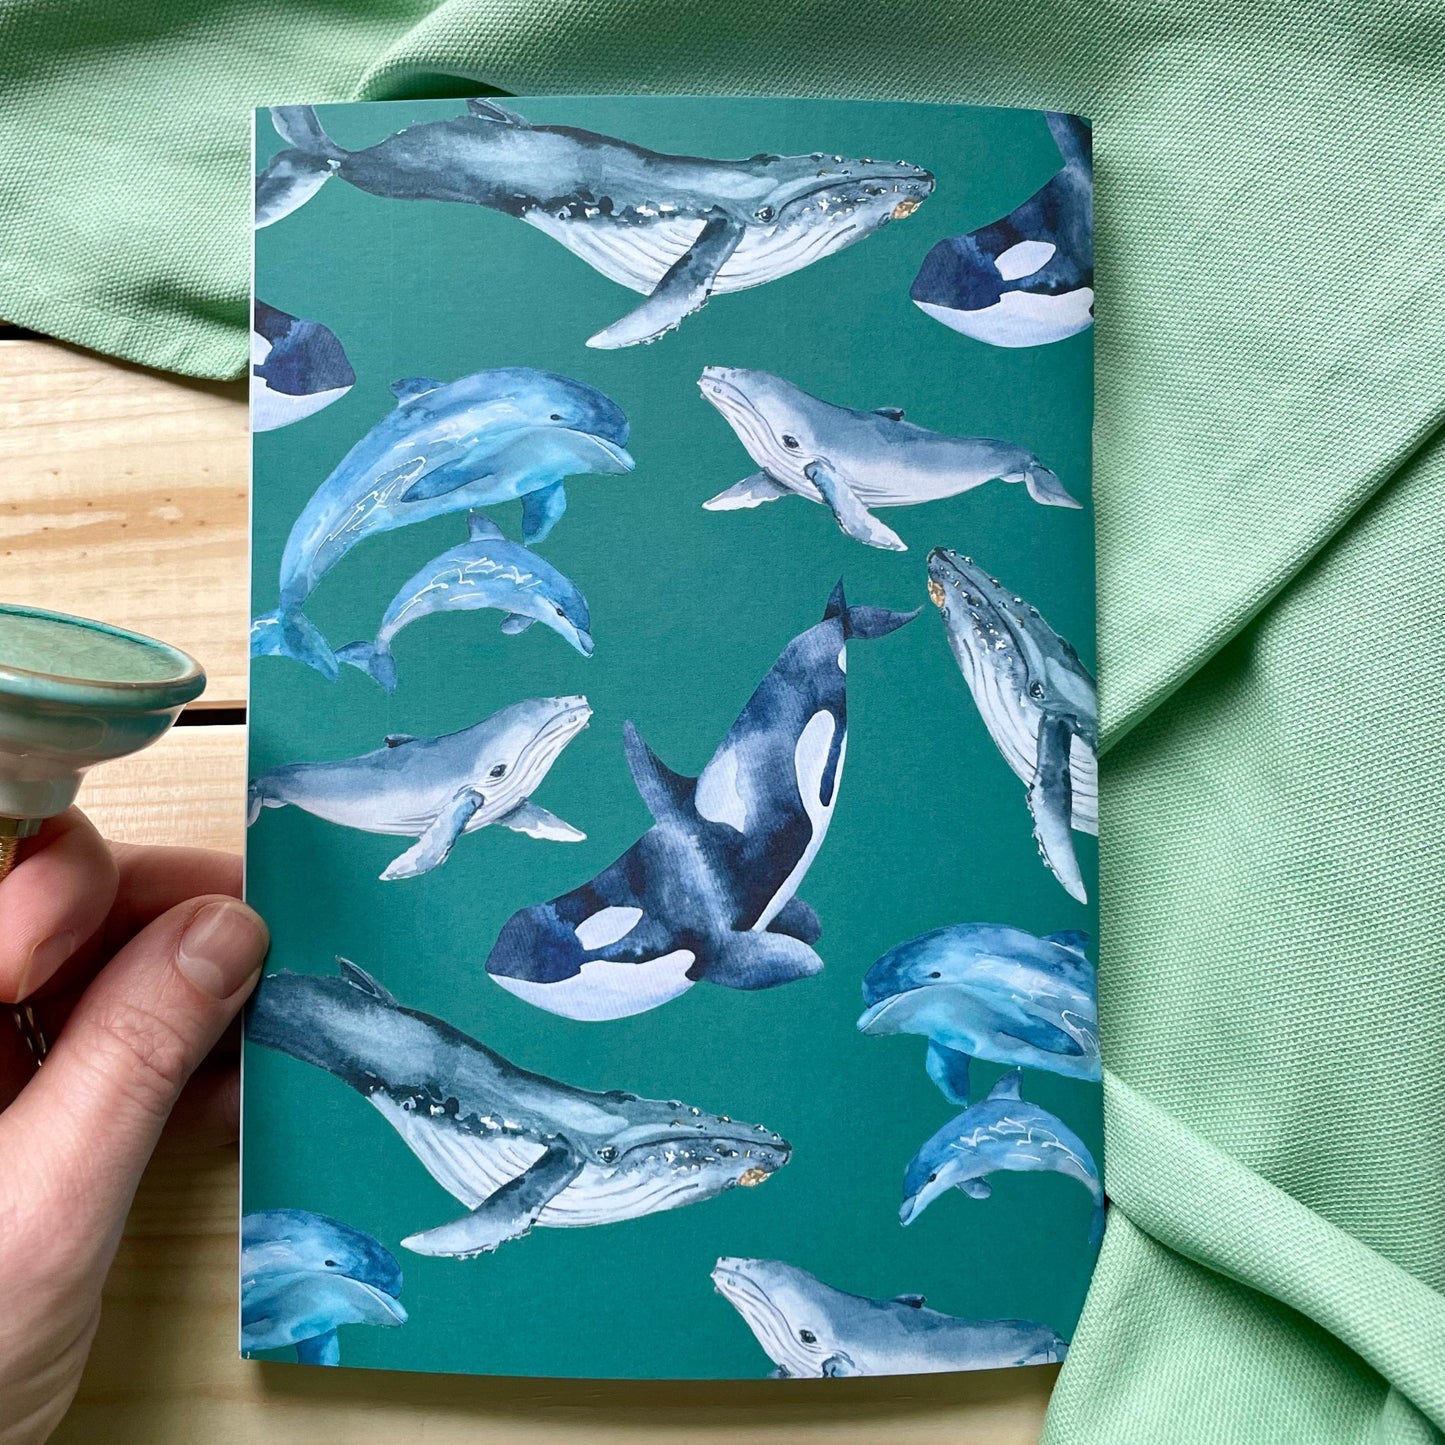 And Hope Designs Notebook Sealife A5 lined notebook